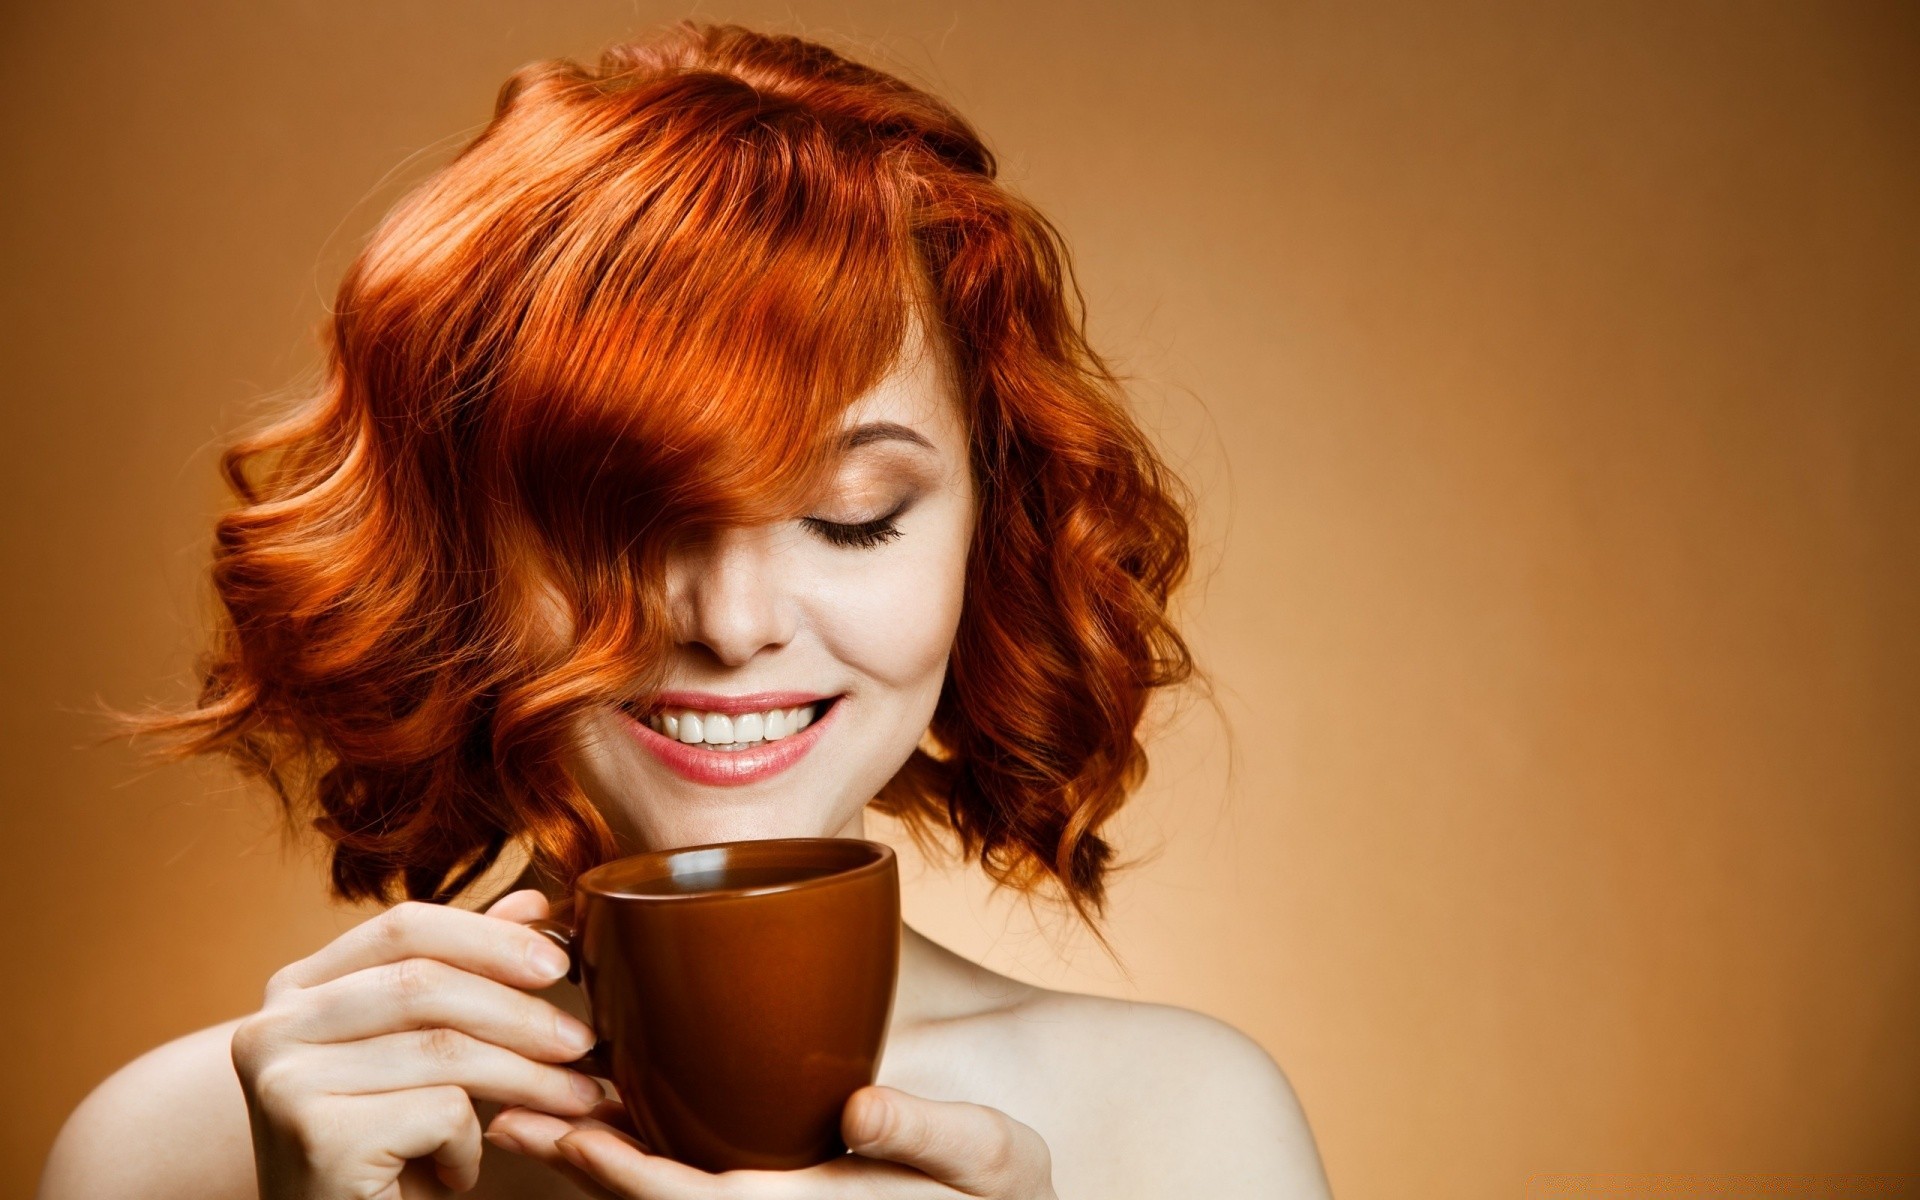 the other girls coffee tea dawn woman cup drink mug cappuccino breakfast portrait indoors relaxation girl